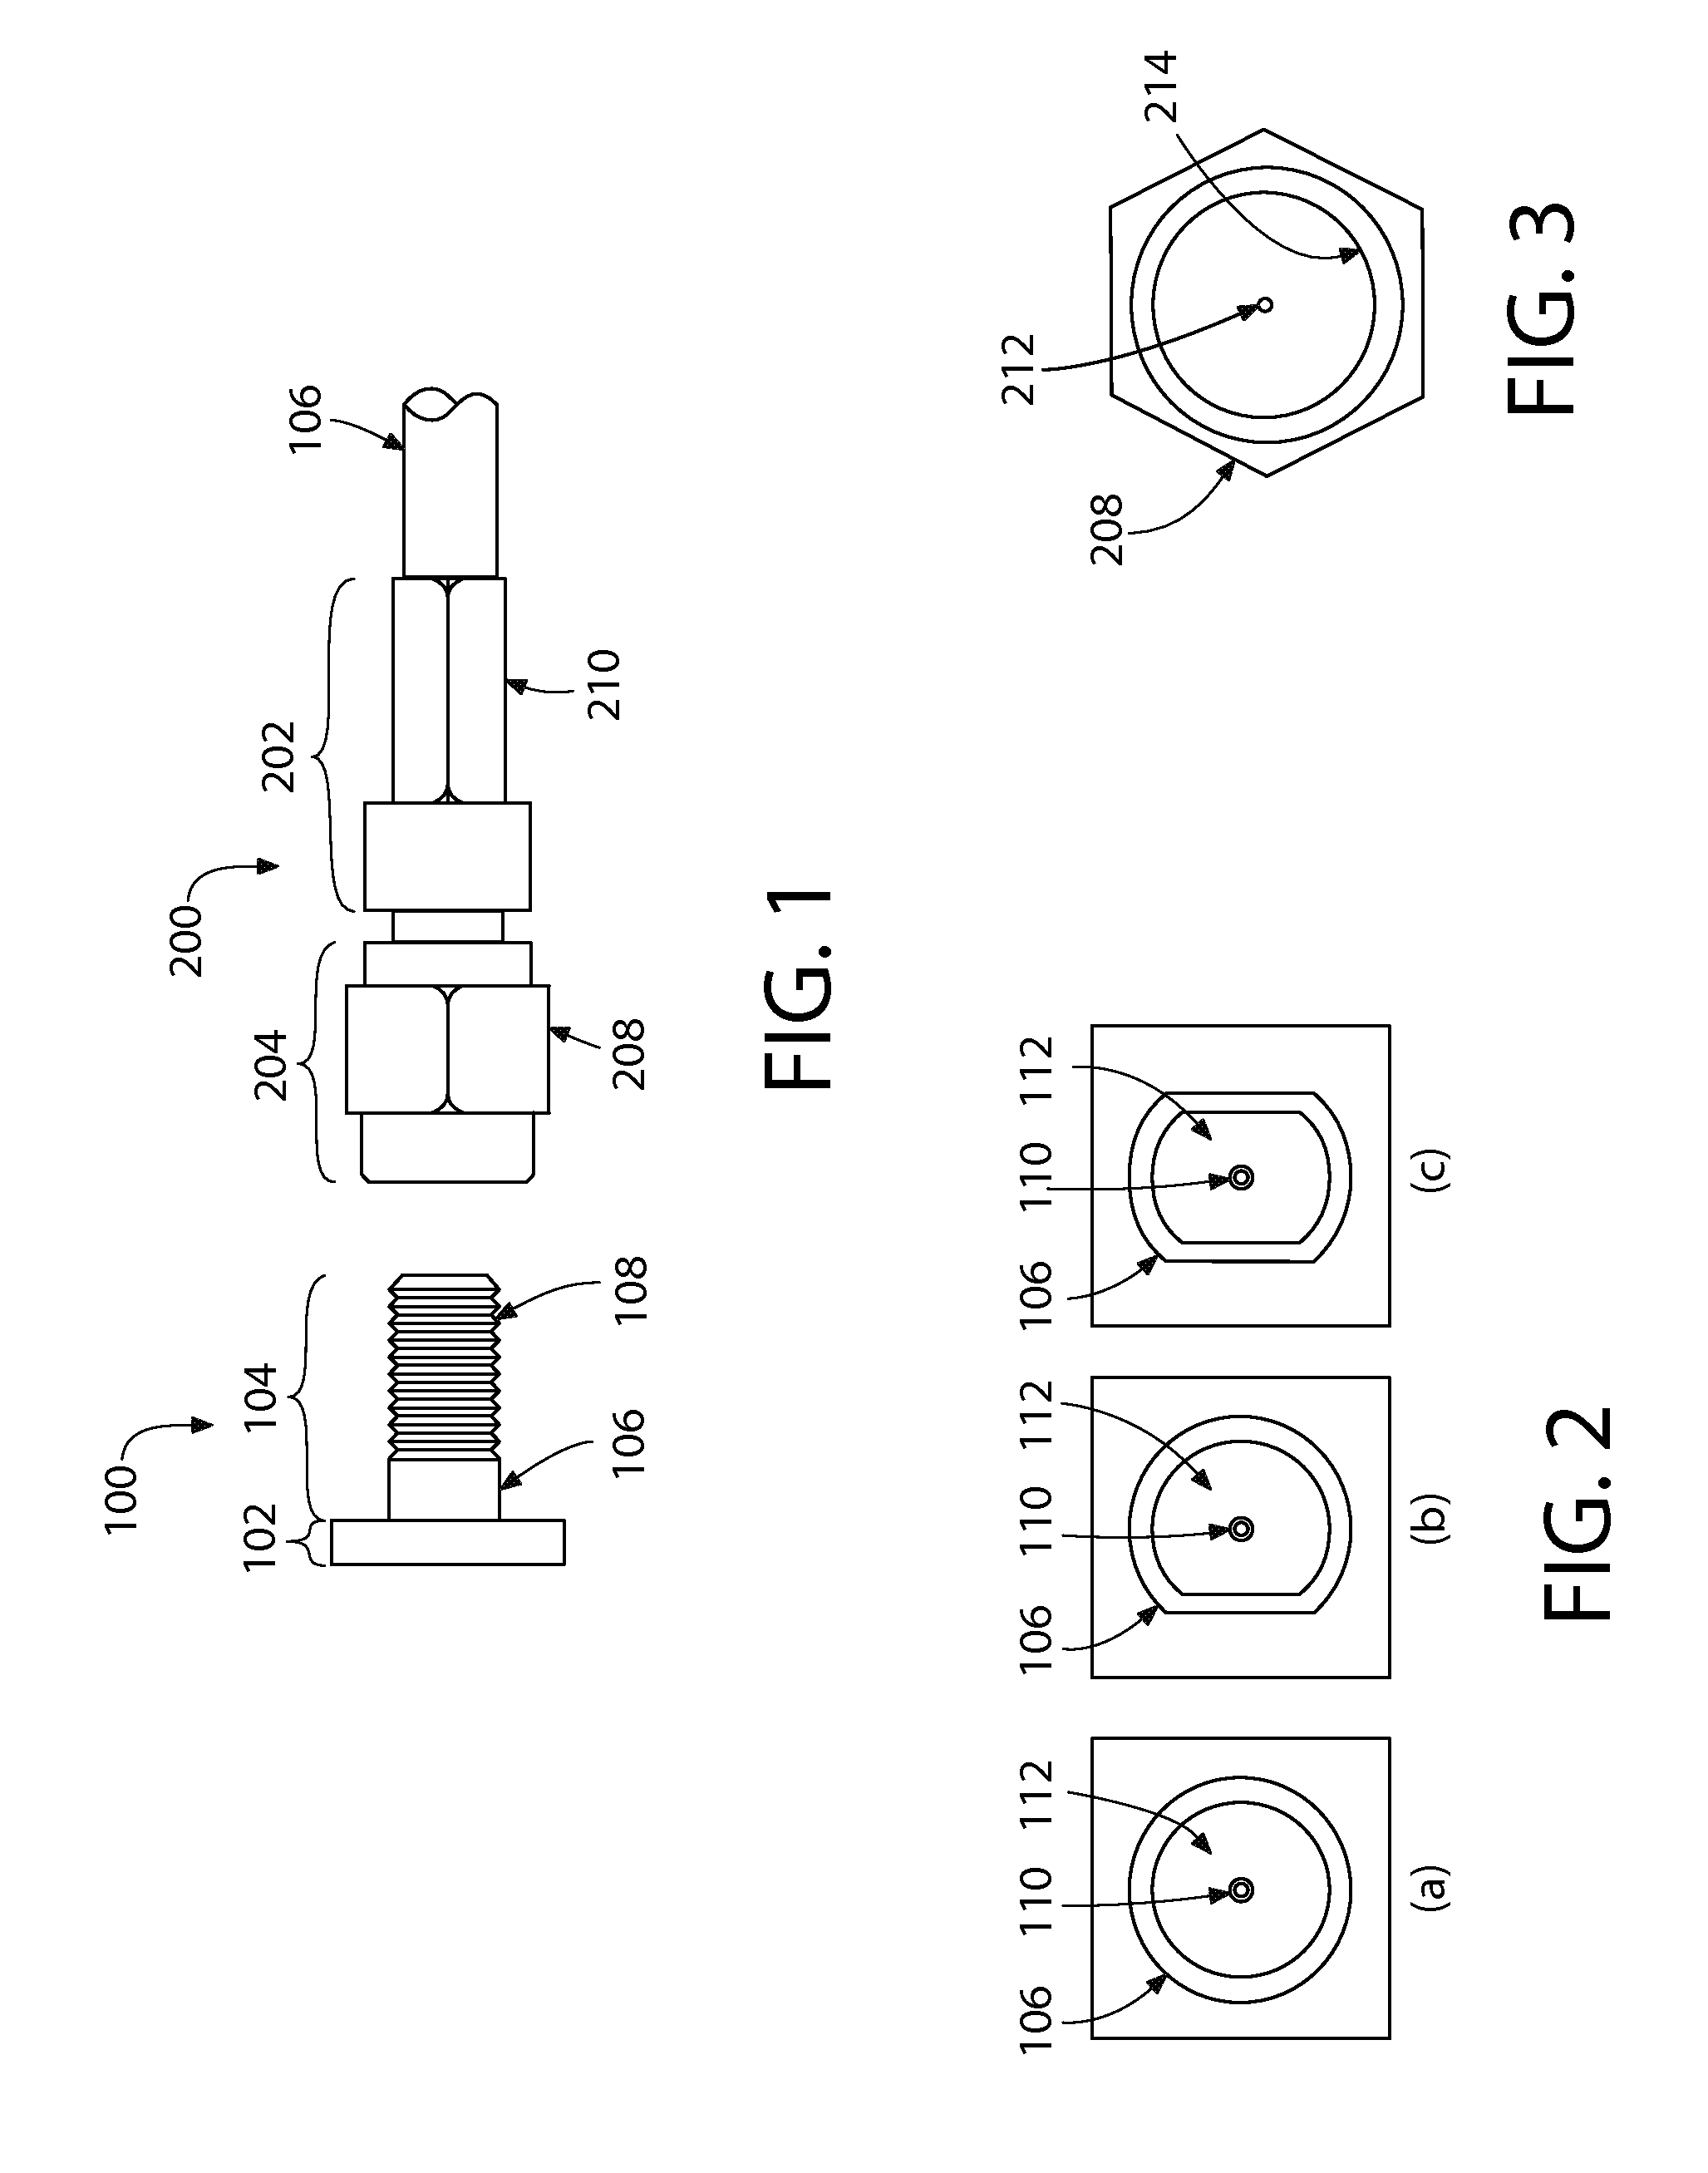 Anti-rotation device for electrical connectors